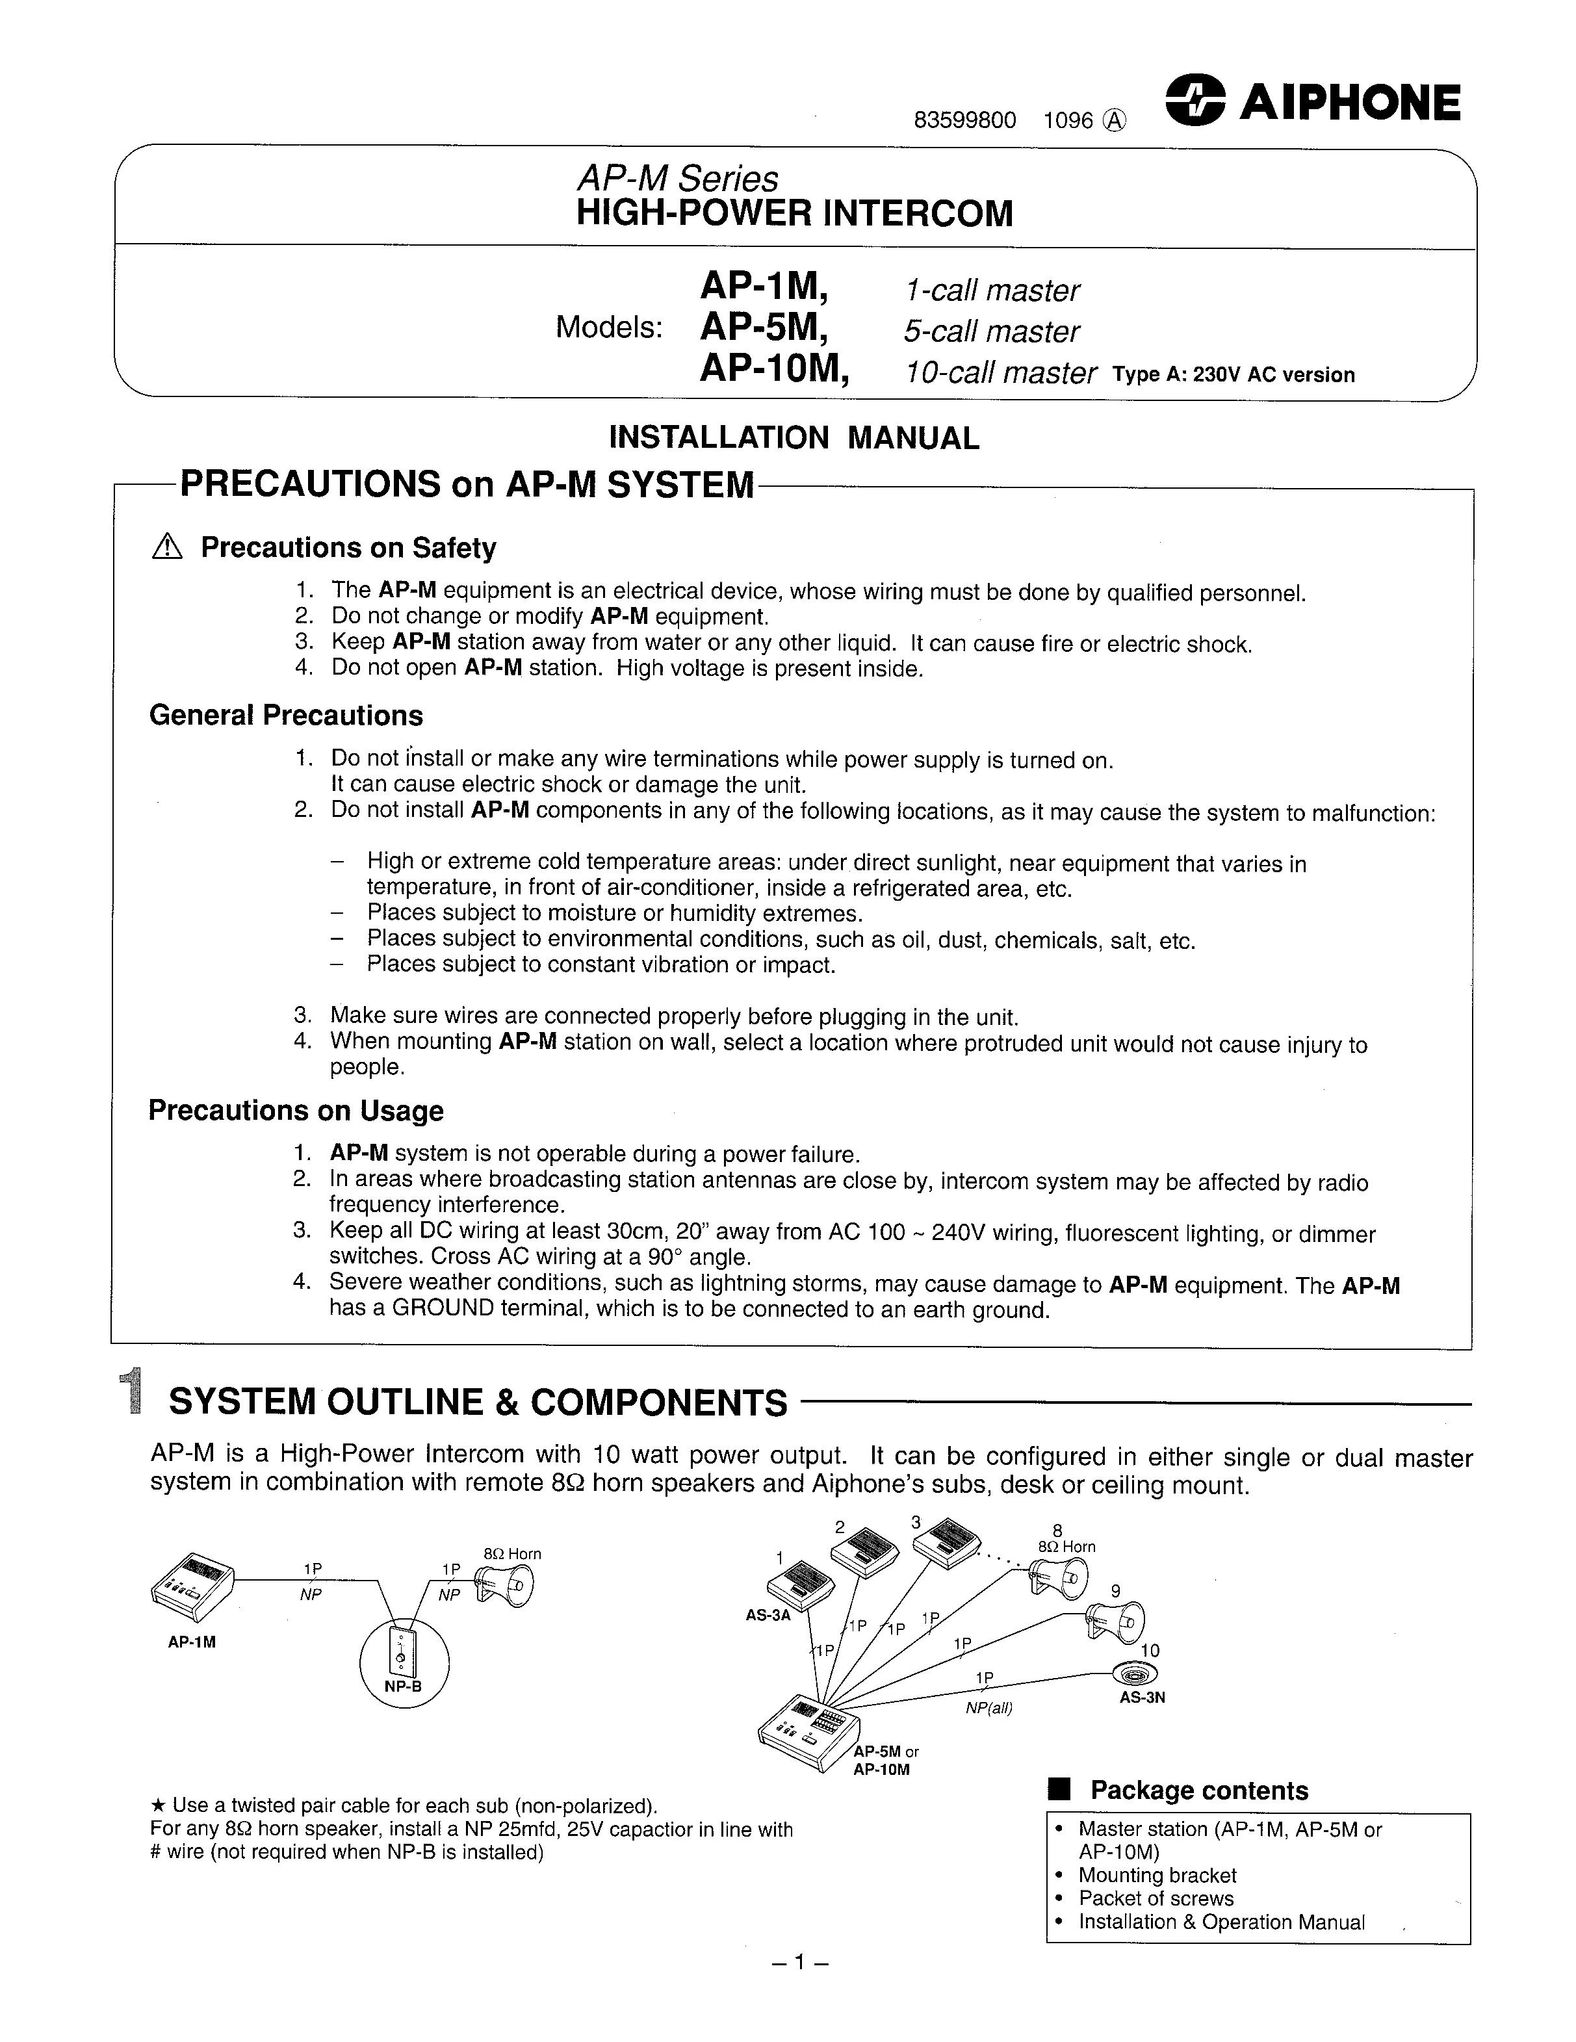 Aiphone Ap-5m Home Security System User Manual